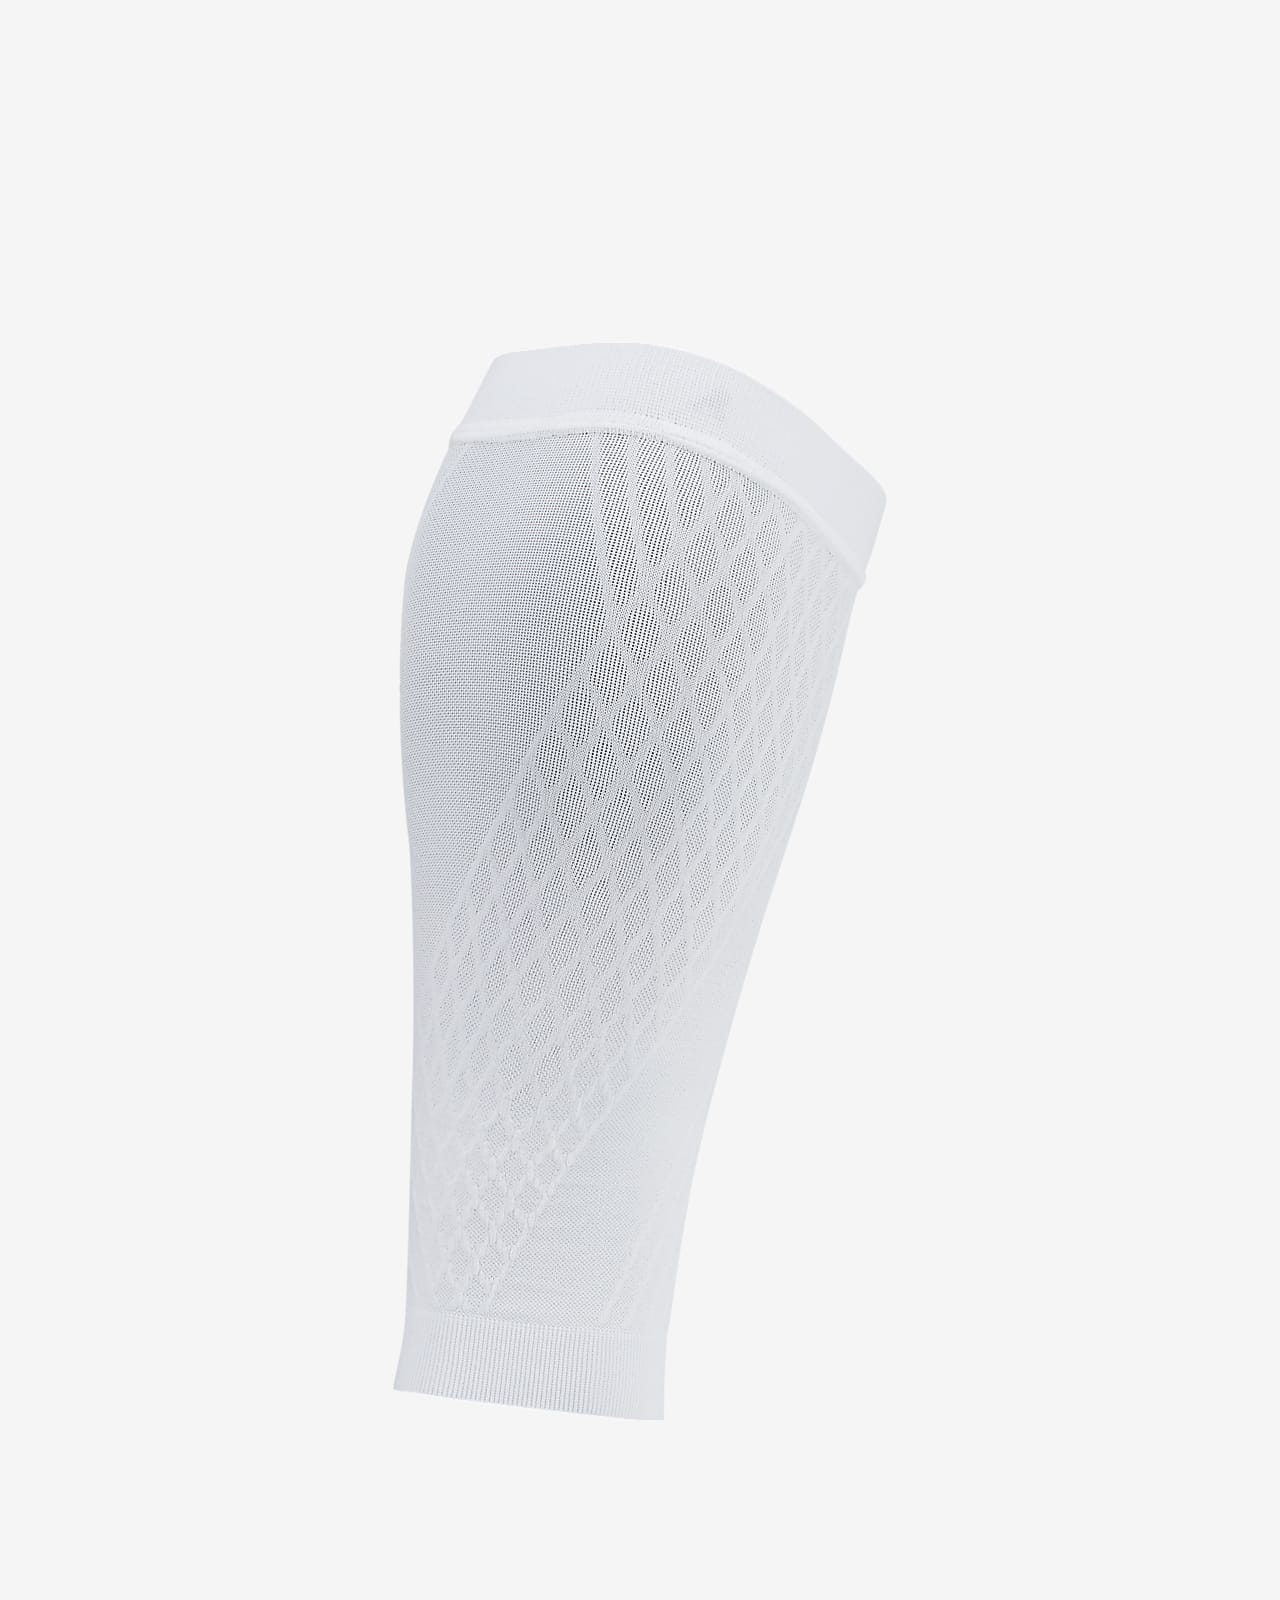 Gear Check: Nike Pro Calf Sleeve – Bad Angel Rules for Running